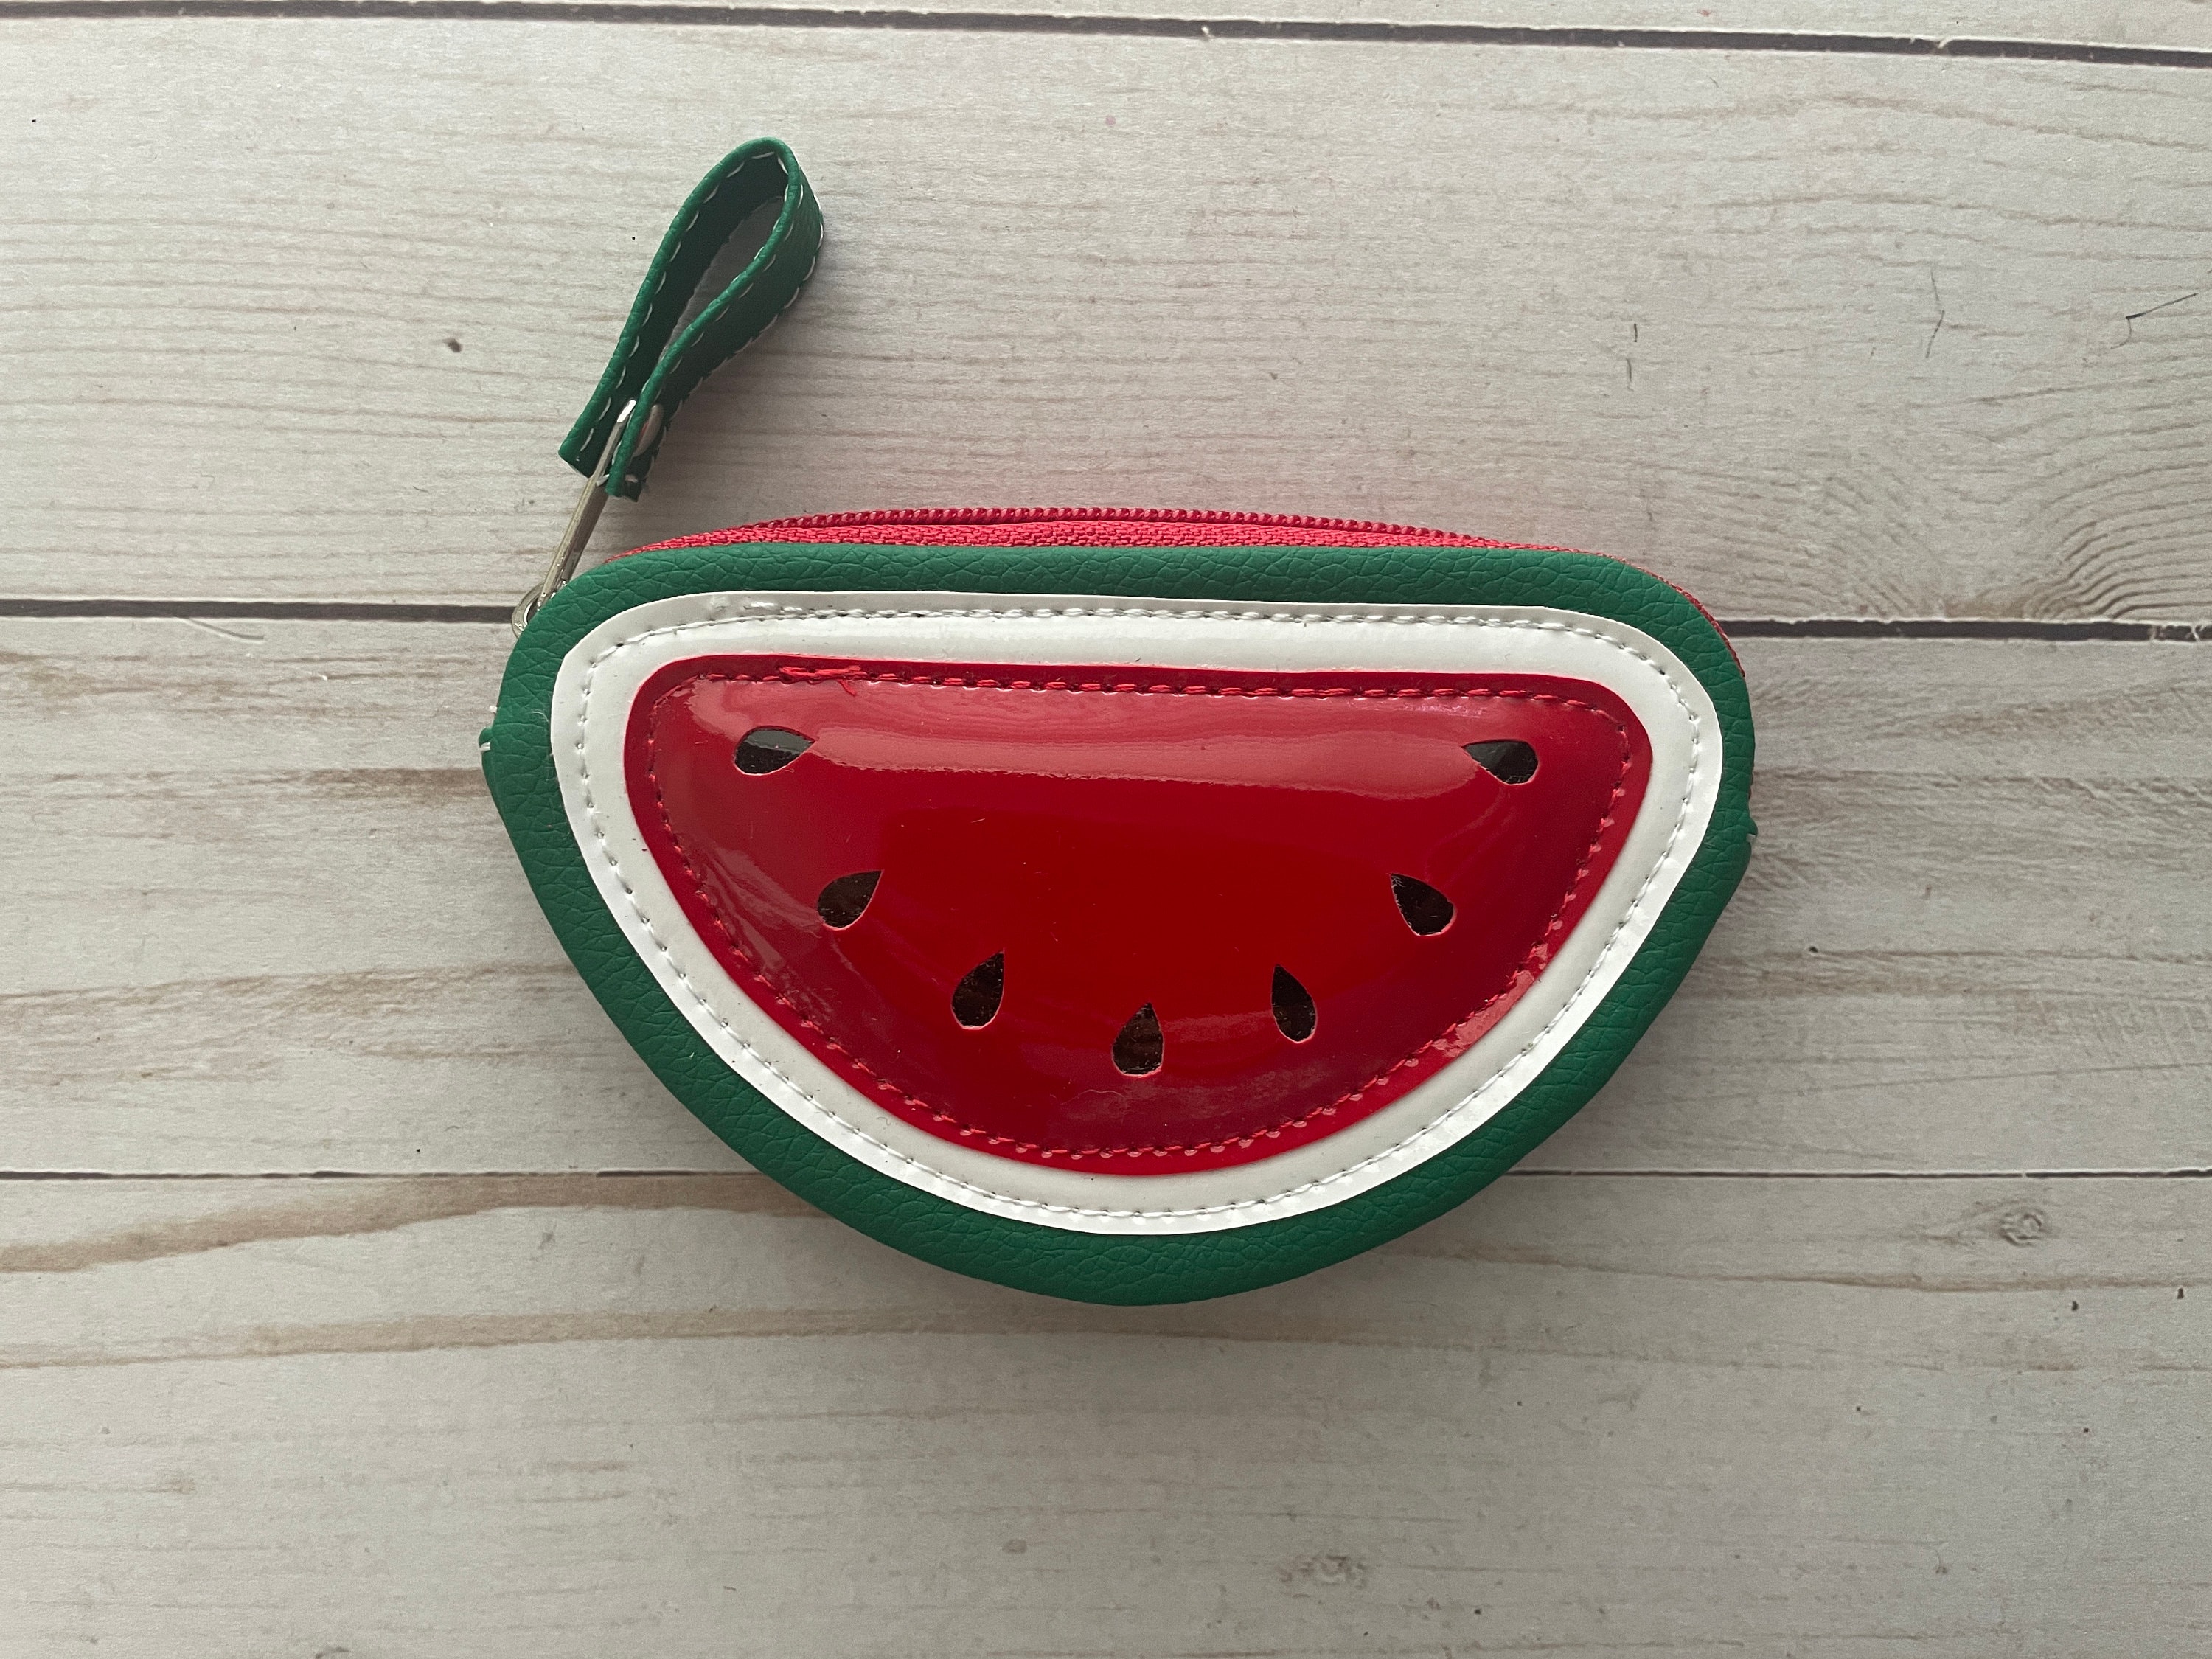 Mywalit watermelon coin purse